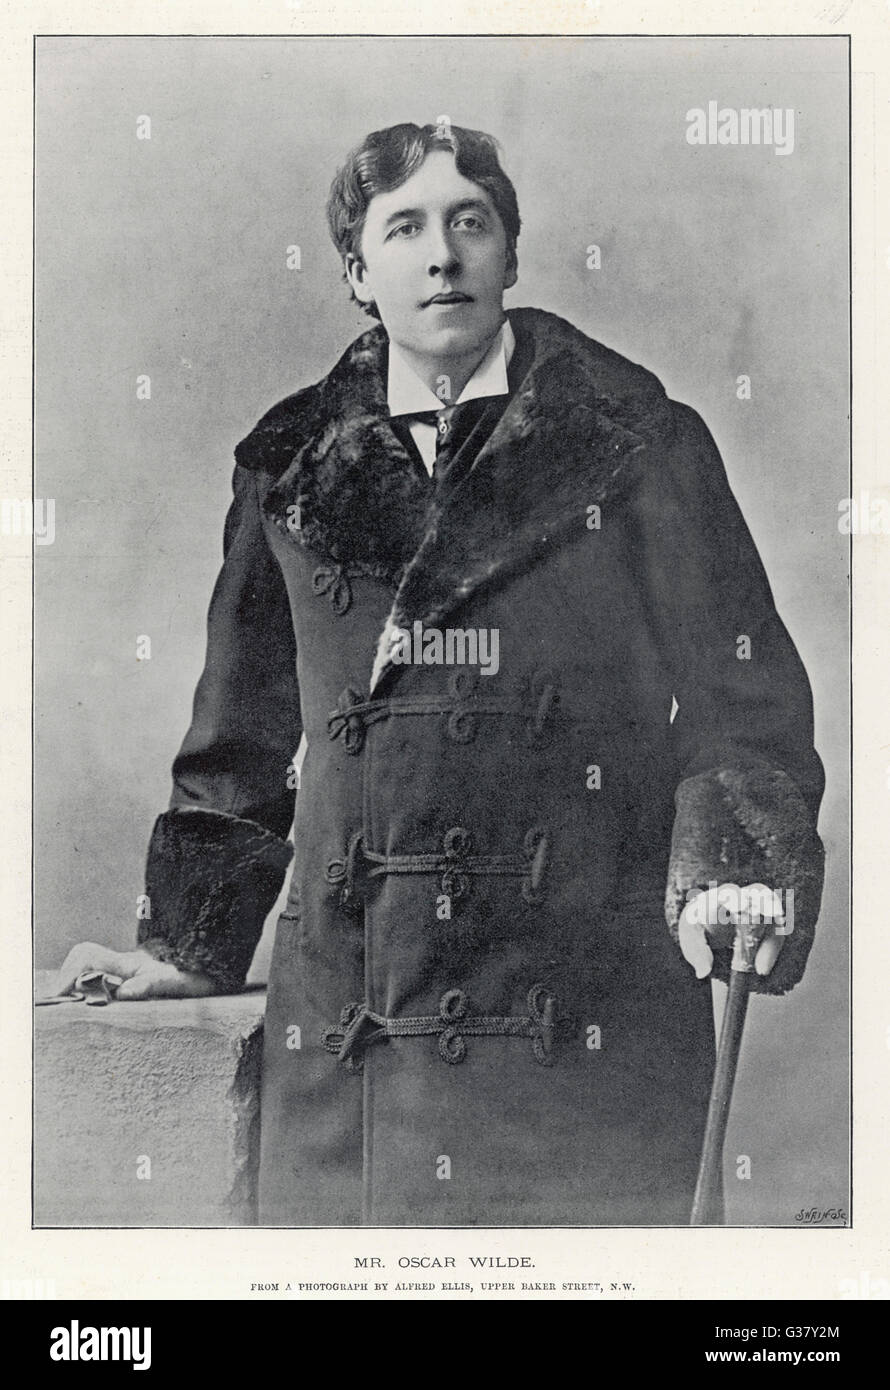 Oscar Wilde(1856-1900), Irish writer and playwright, pictured here in a winter coat with a fur collar. Stock Photo